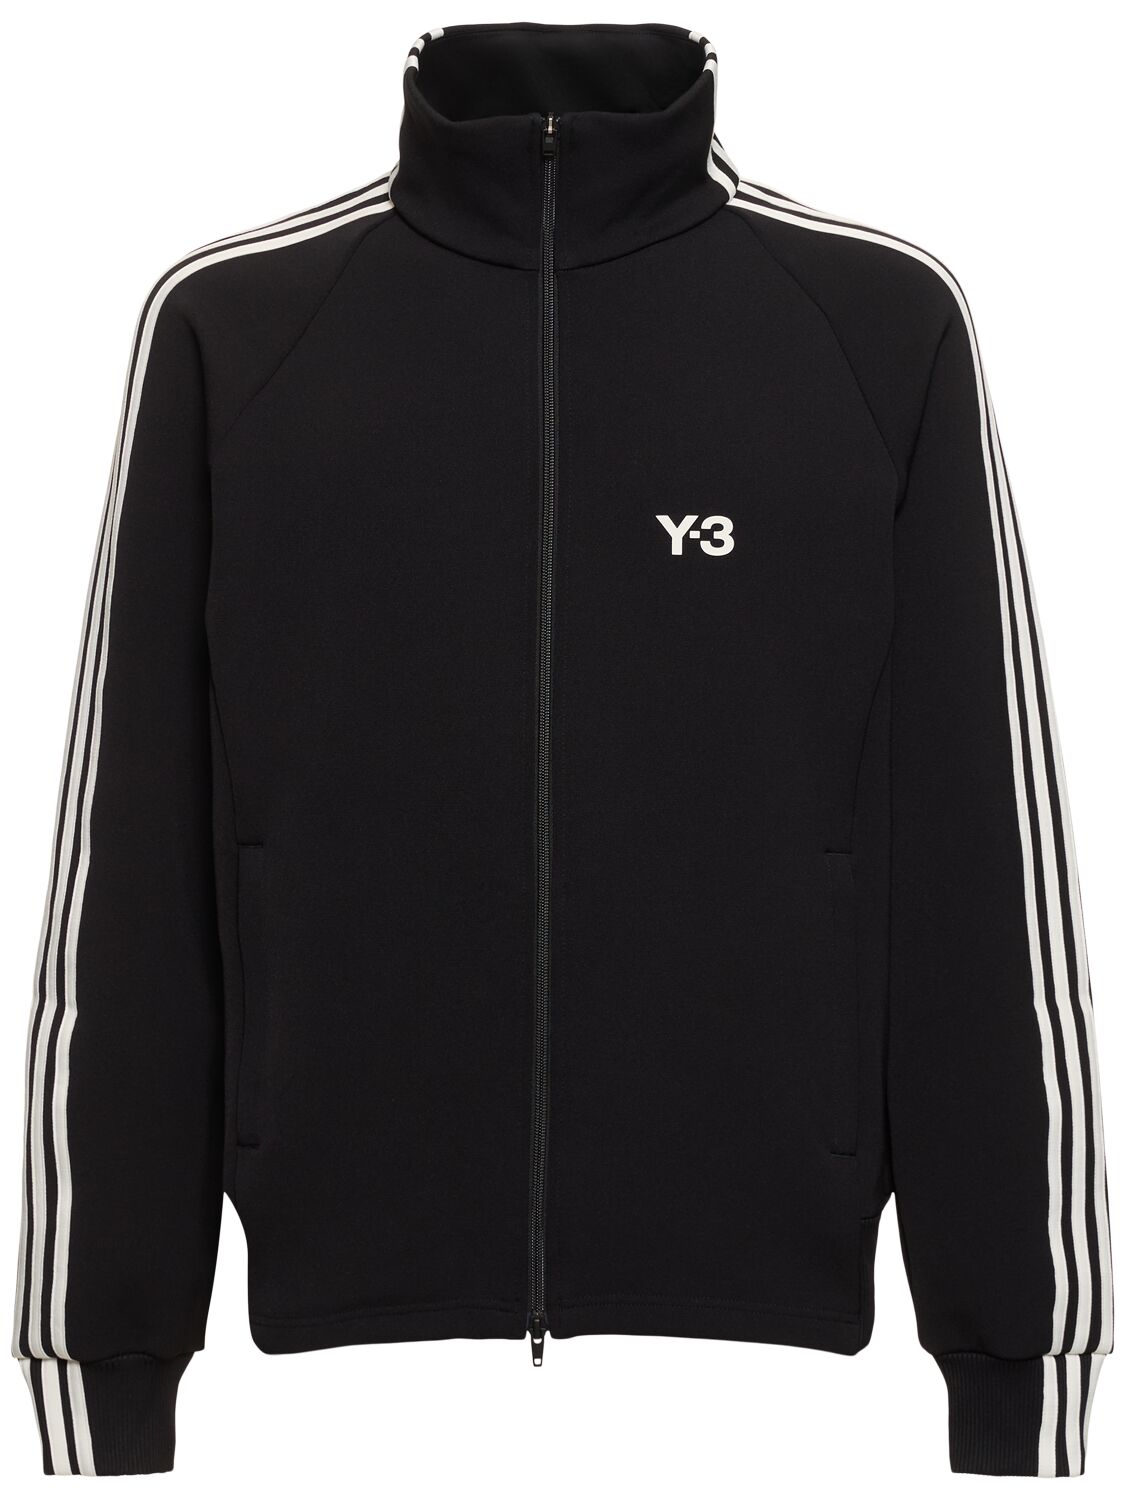 Image of 3s Track Top